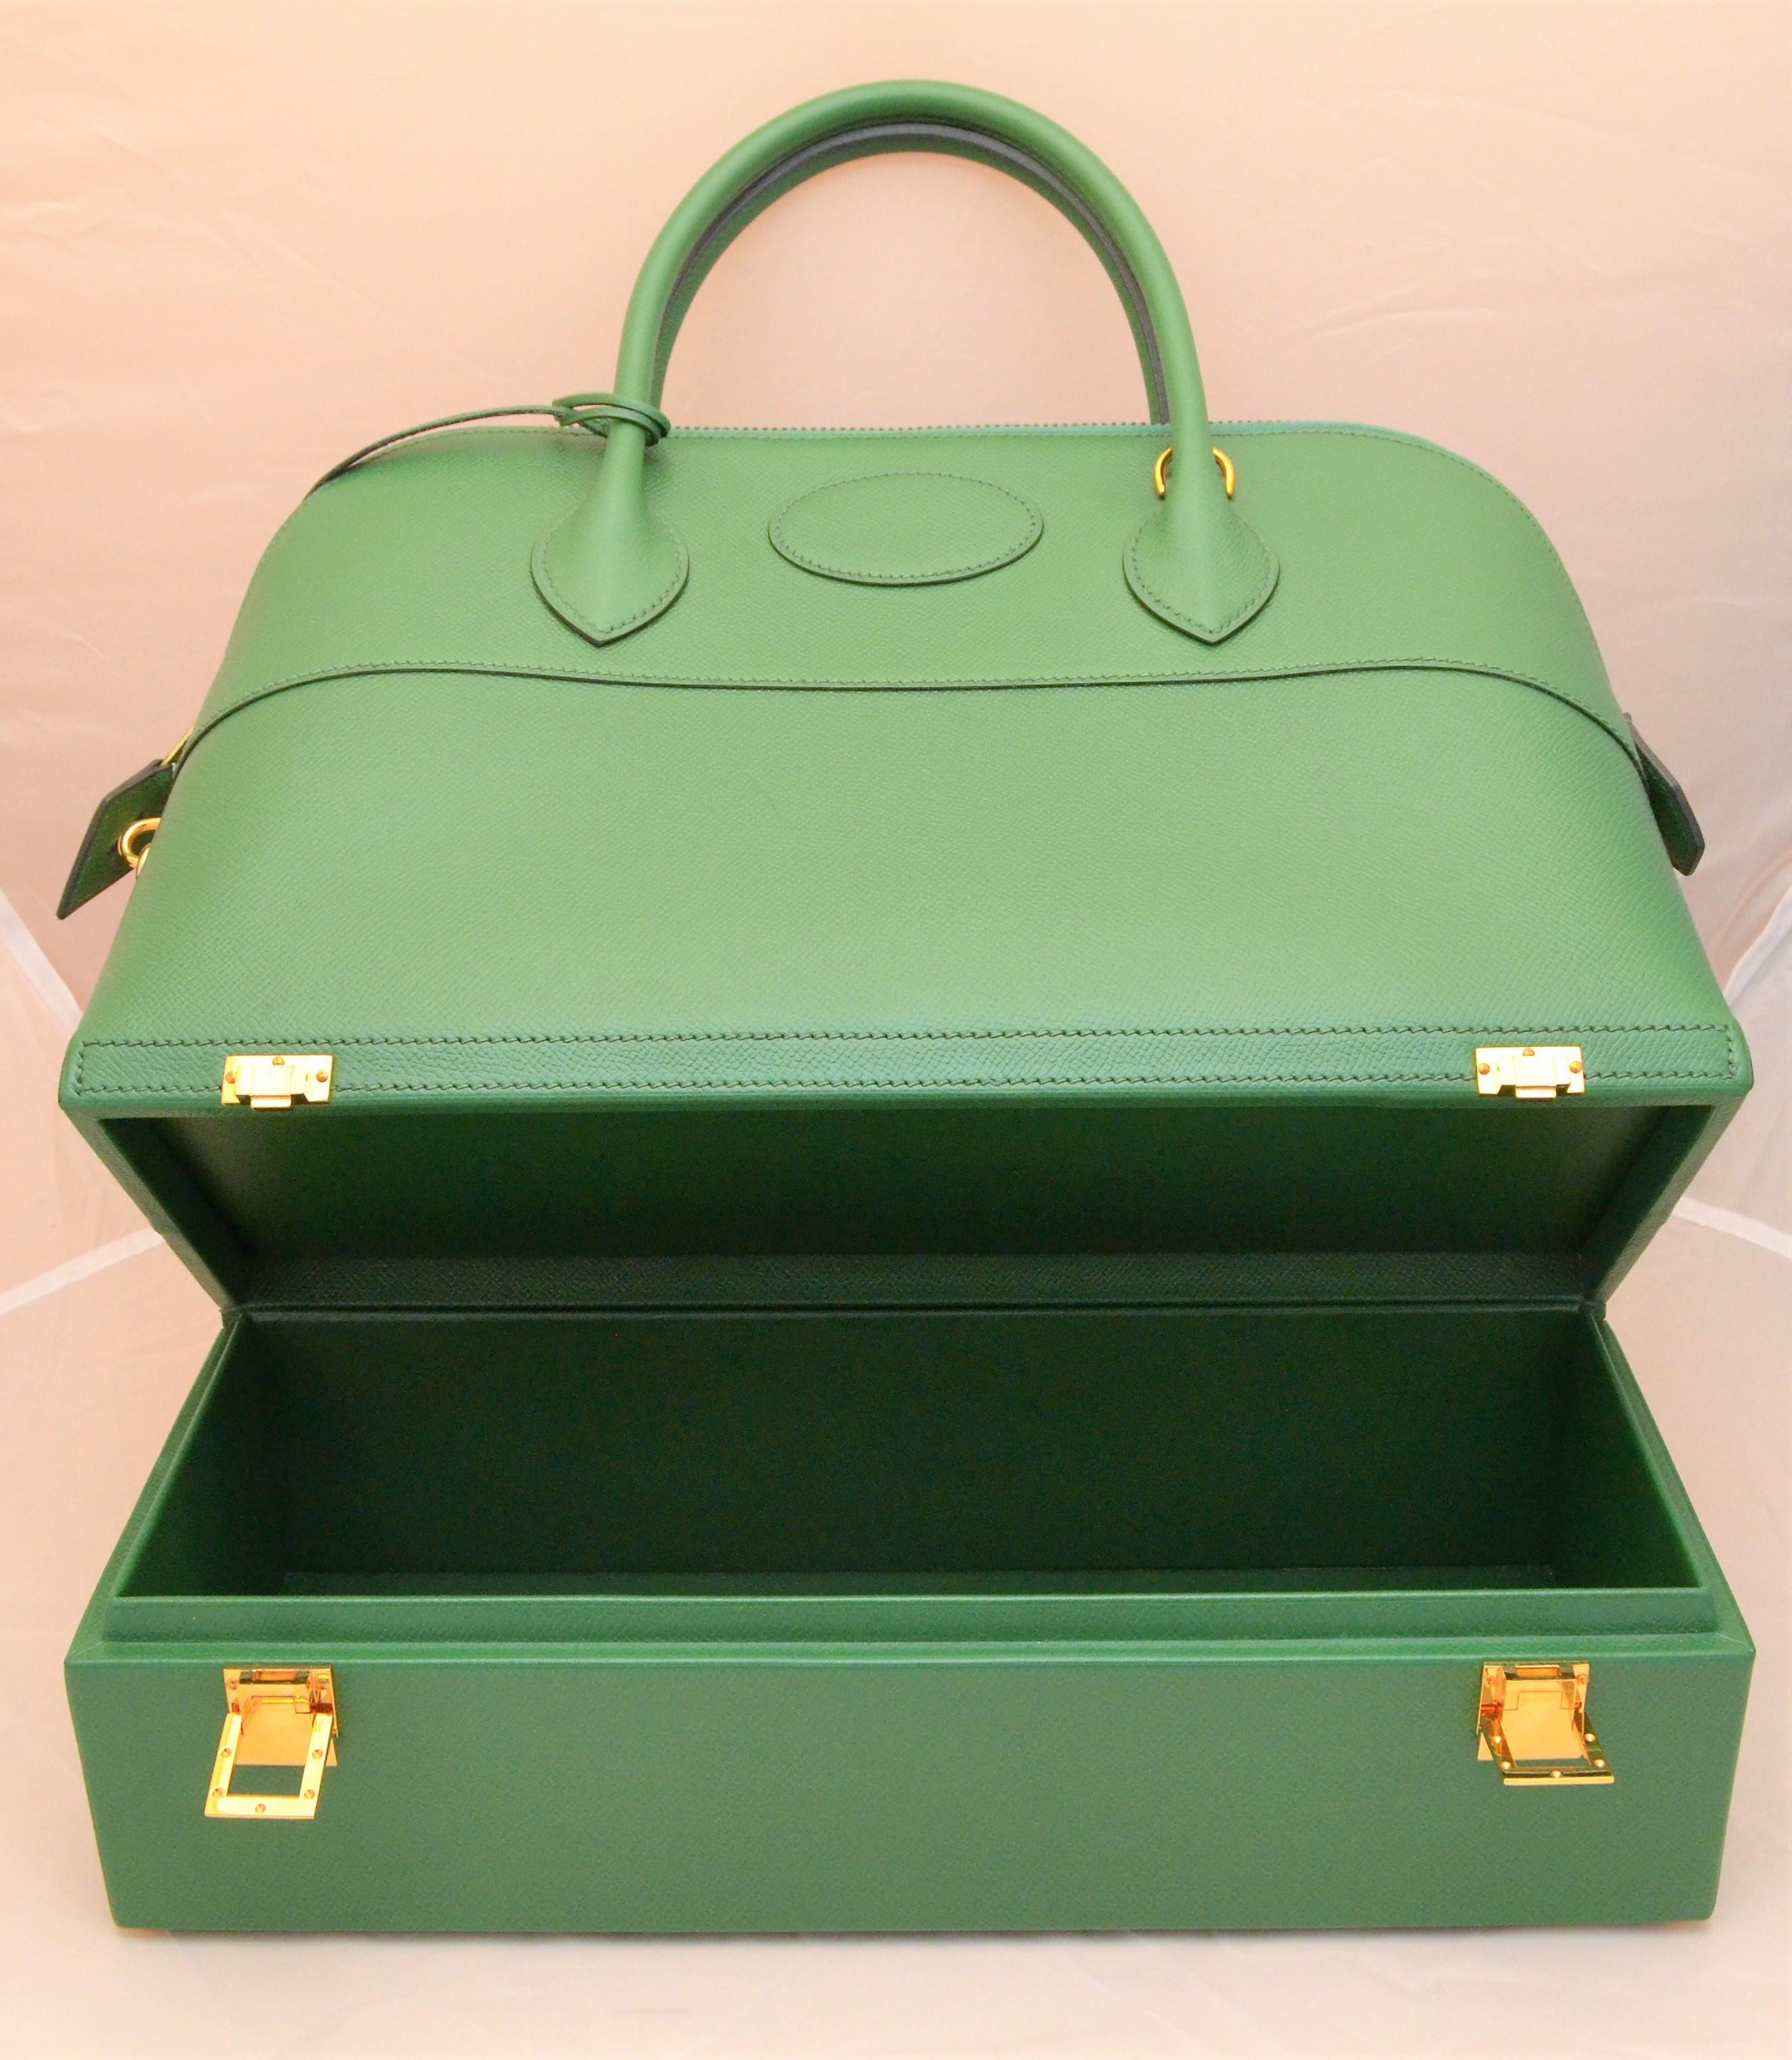 Ultra rare Hermes green Macpherson bag designed for supermodel, Elle Macpherson, features a structured top with a zipper and padlock closure, two handles, removable shoulder strap, and a separated compartment at the base of the bag with H latches.